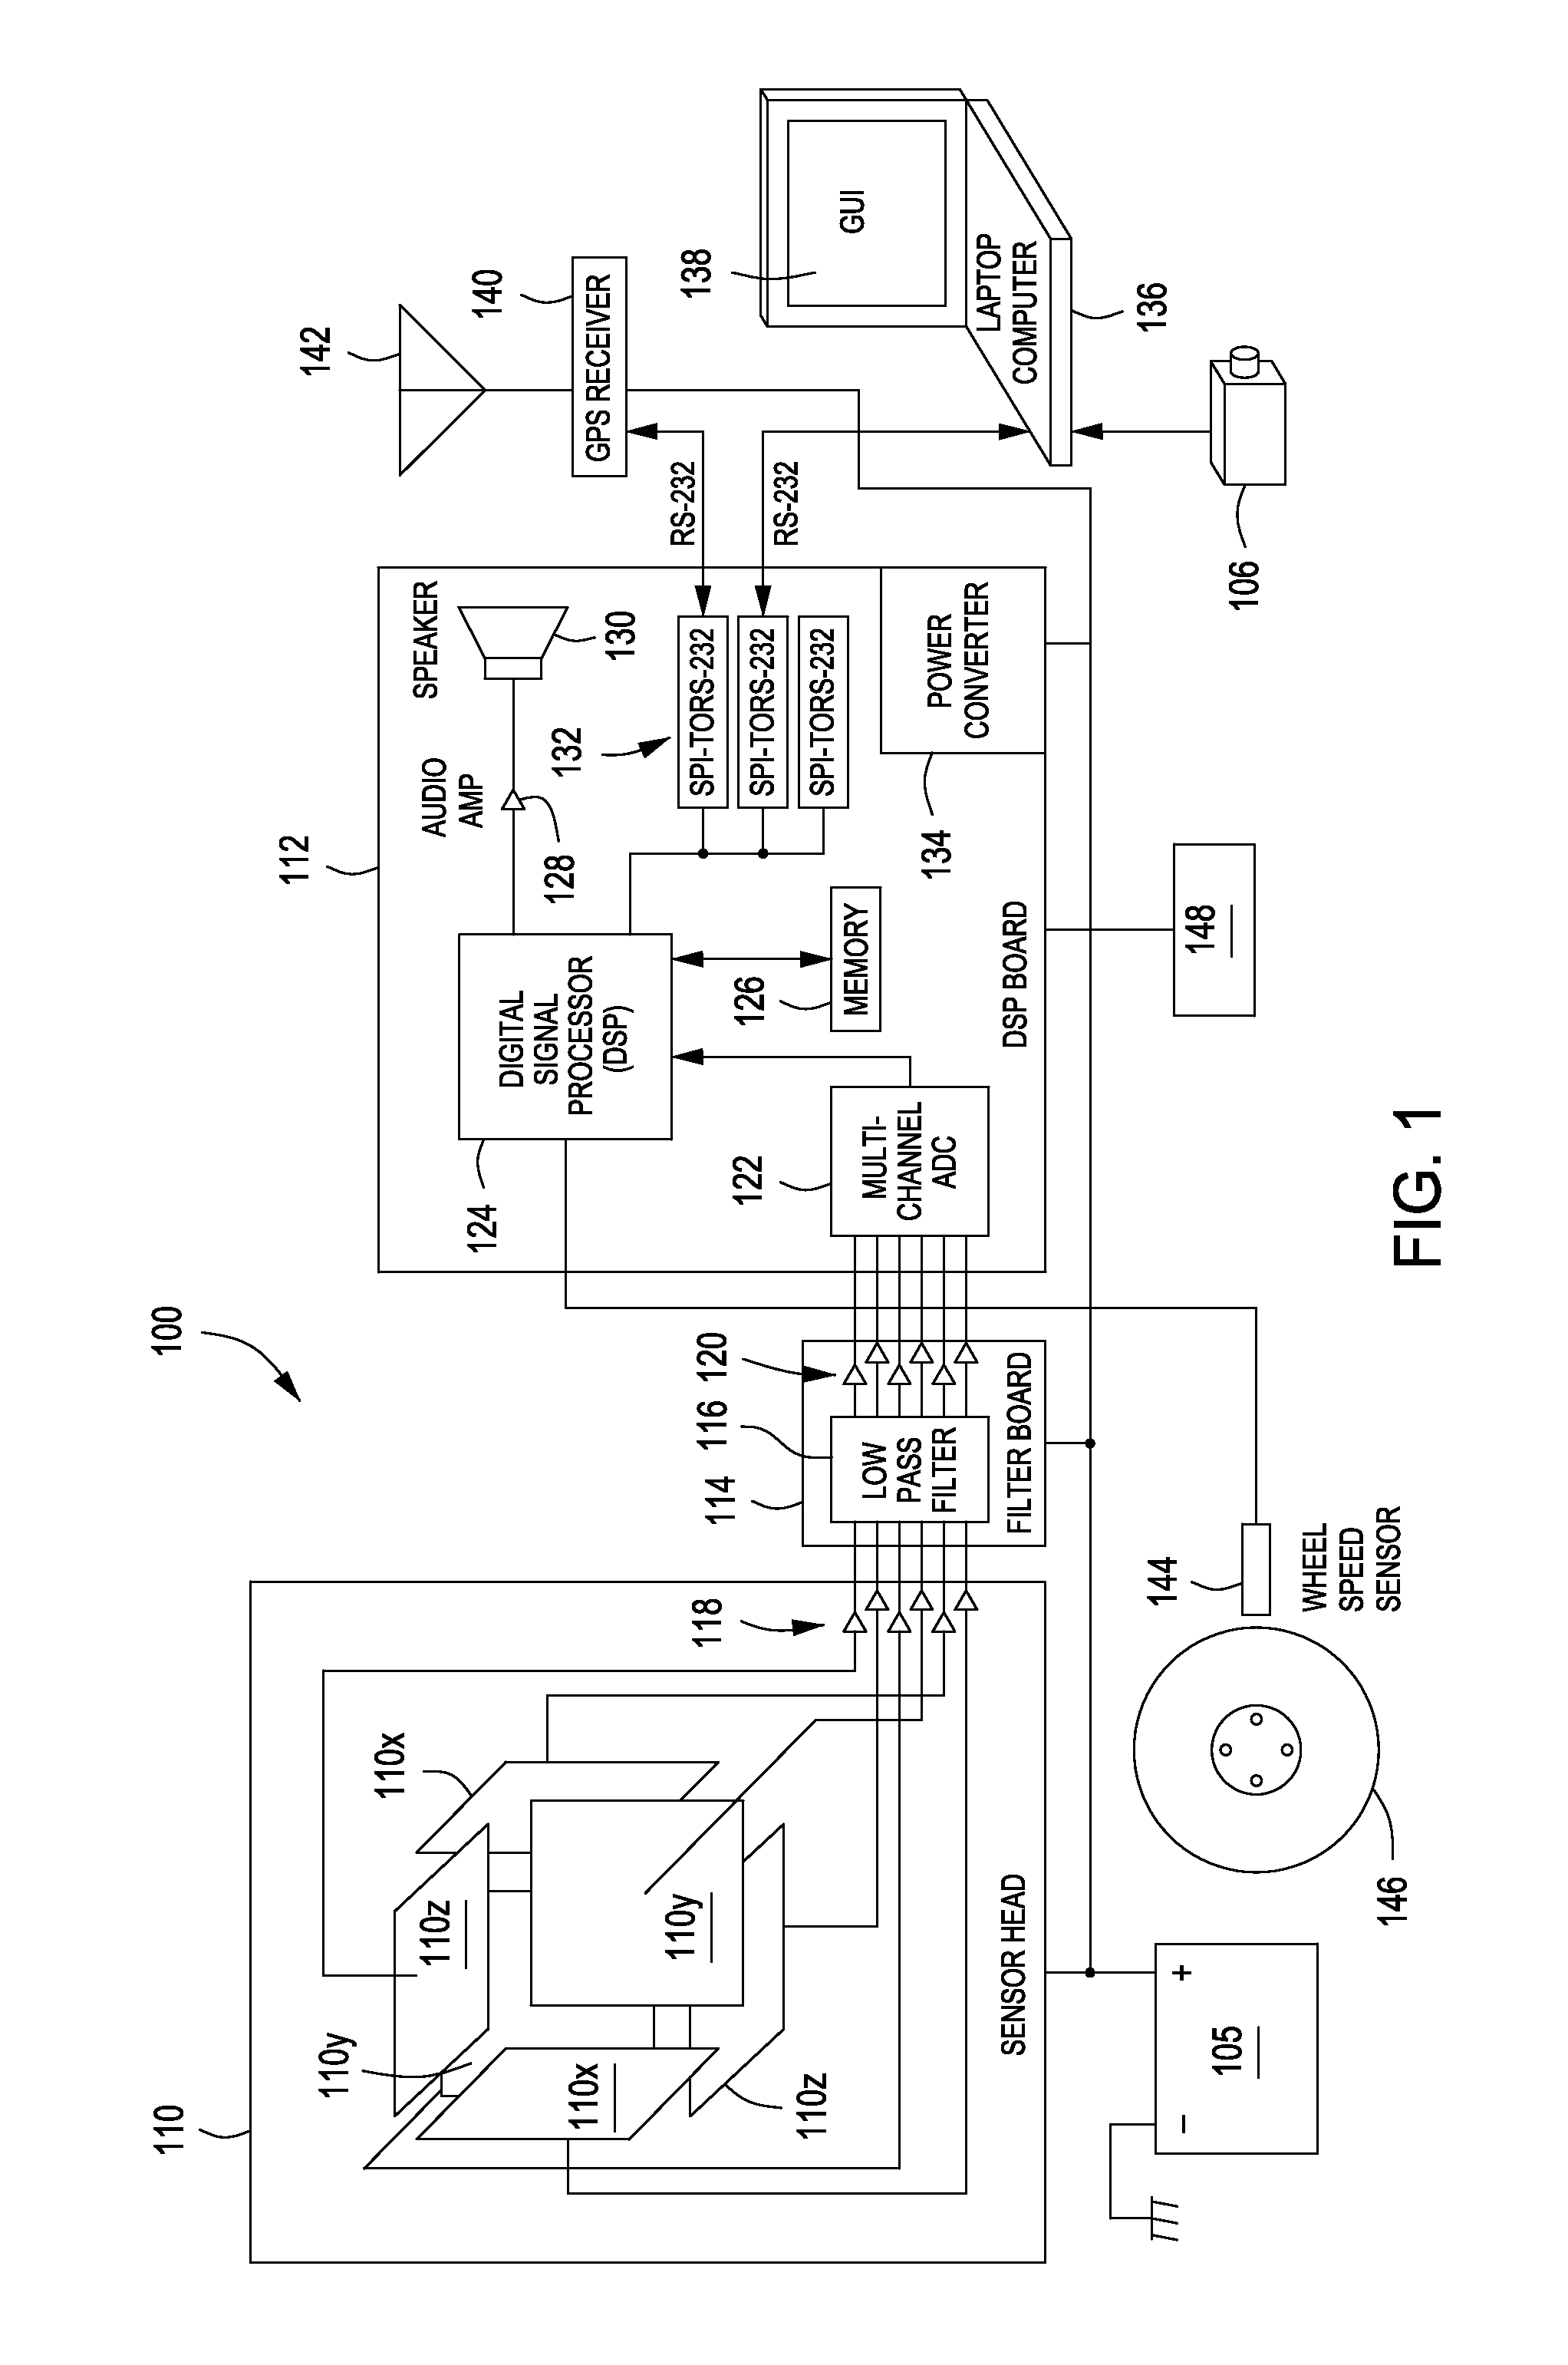 Apparatus and method for monitoring and controlling detection of stray voltage anomalies